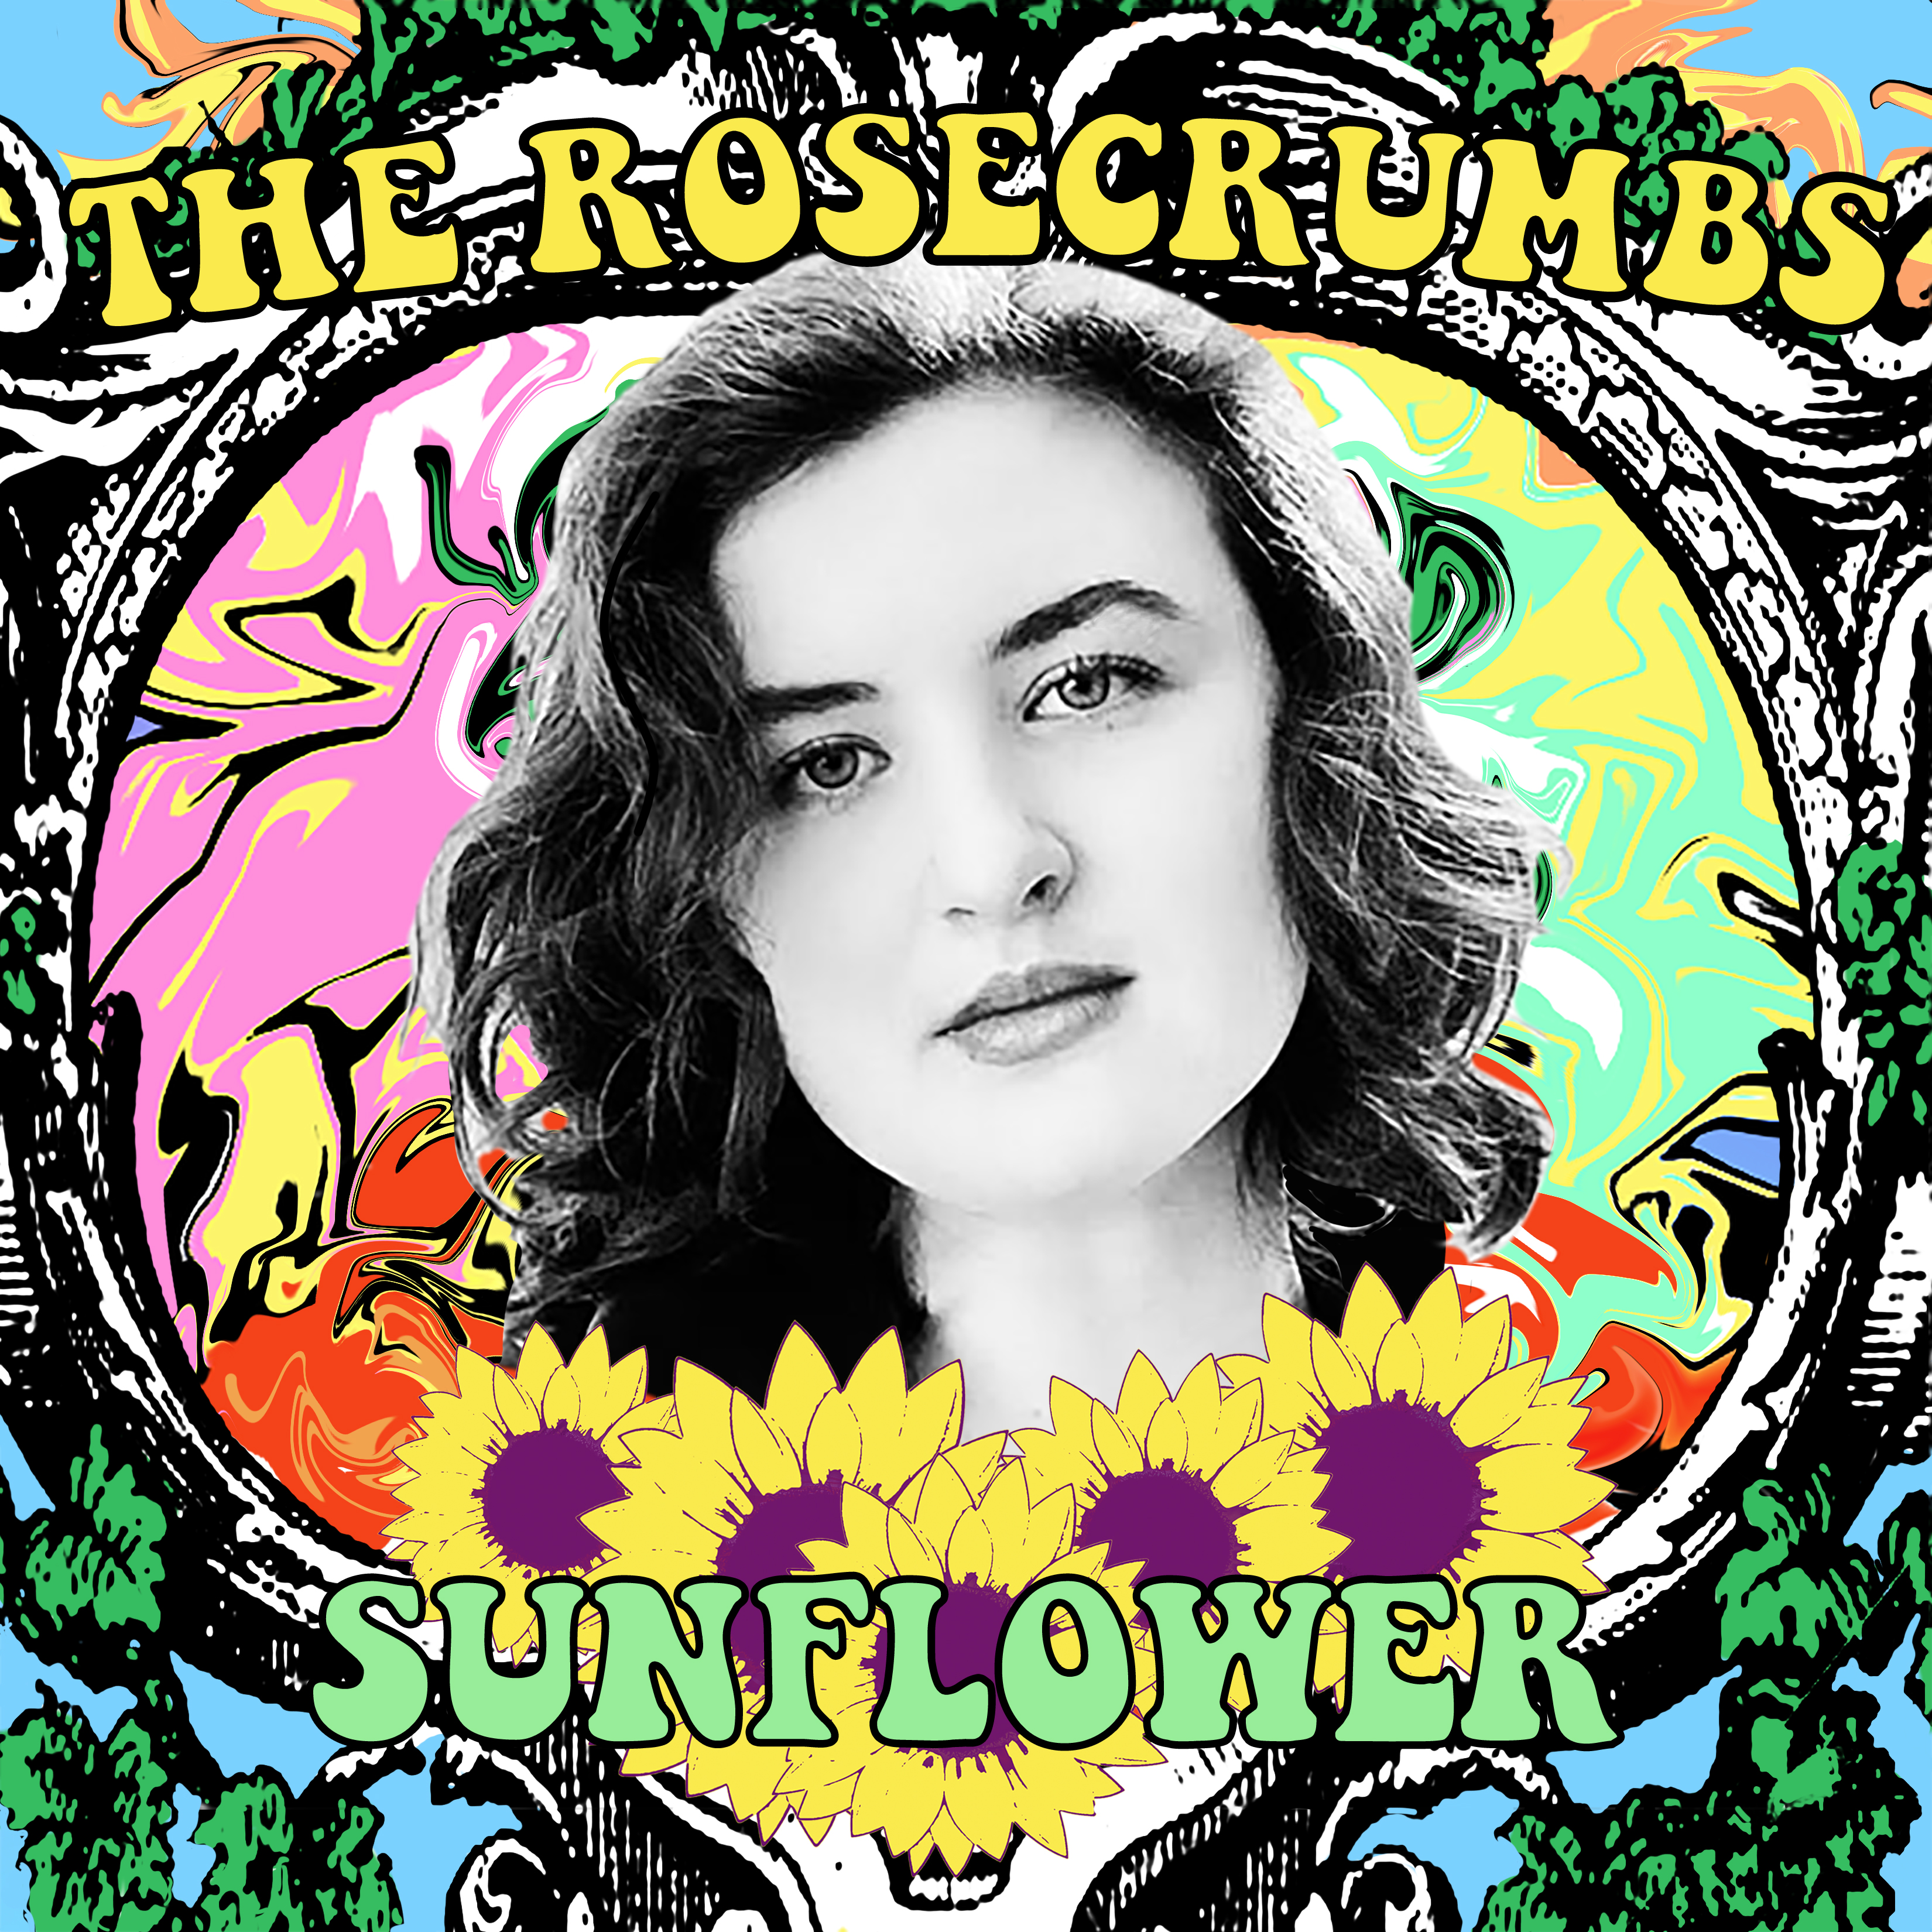 The RoseCrumbs Featuring Devon Gordon and Stephen Perkins (Jane’s Addiction) Highly Anticipated Debut Single "Sunflower" Now Available Worldwide